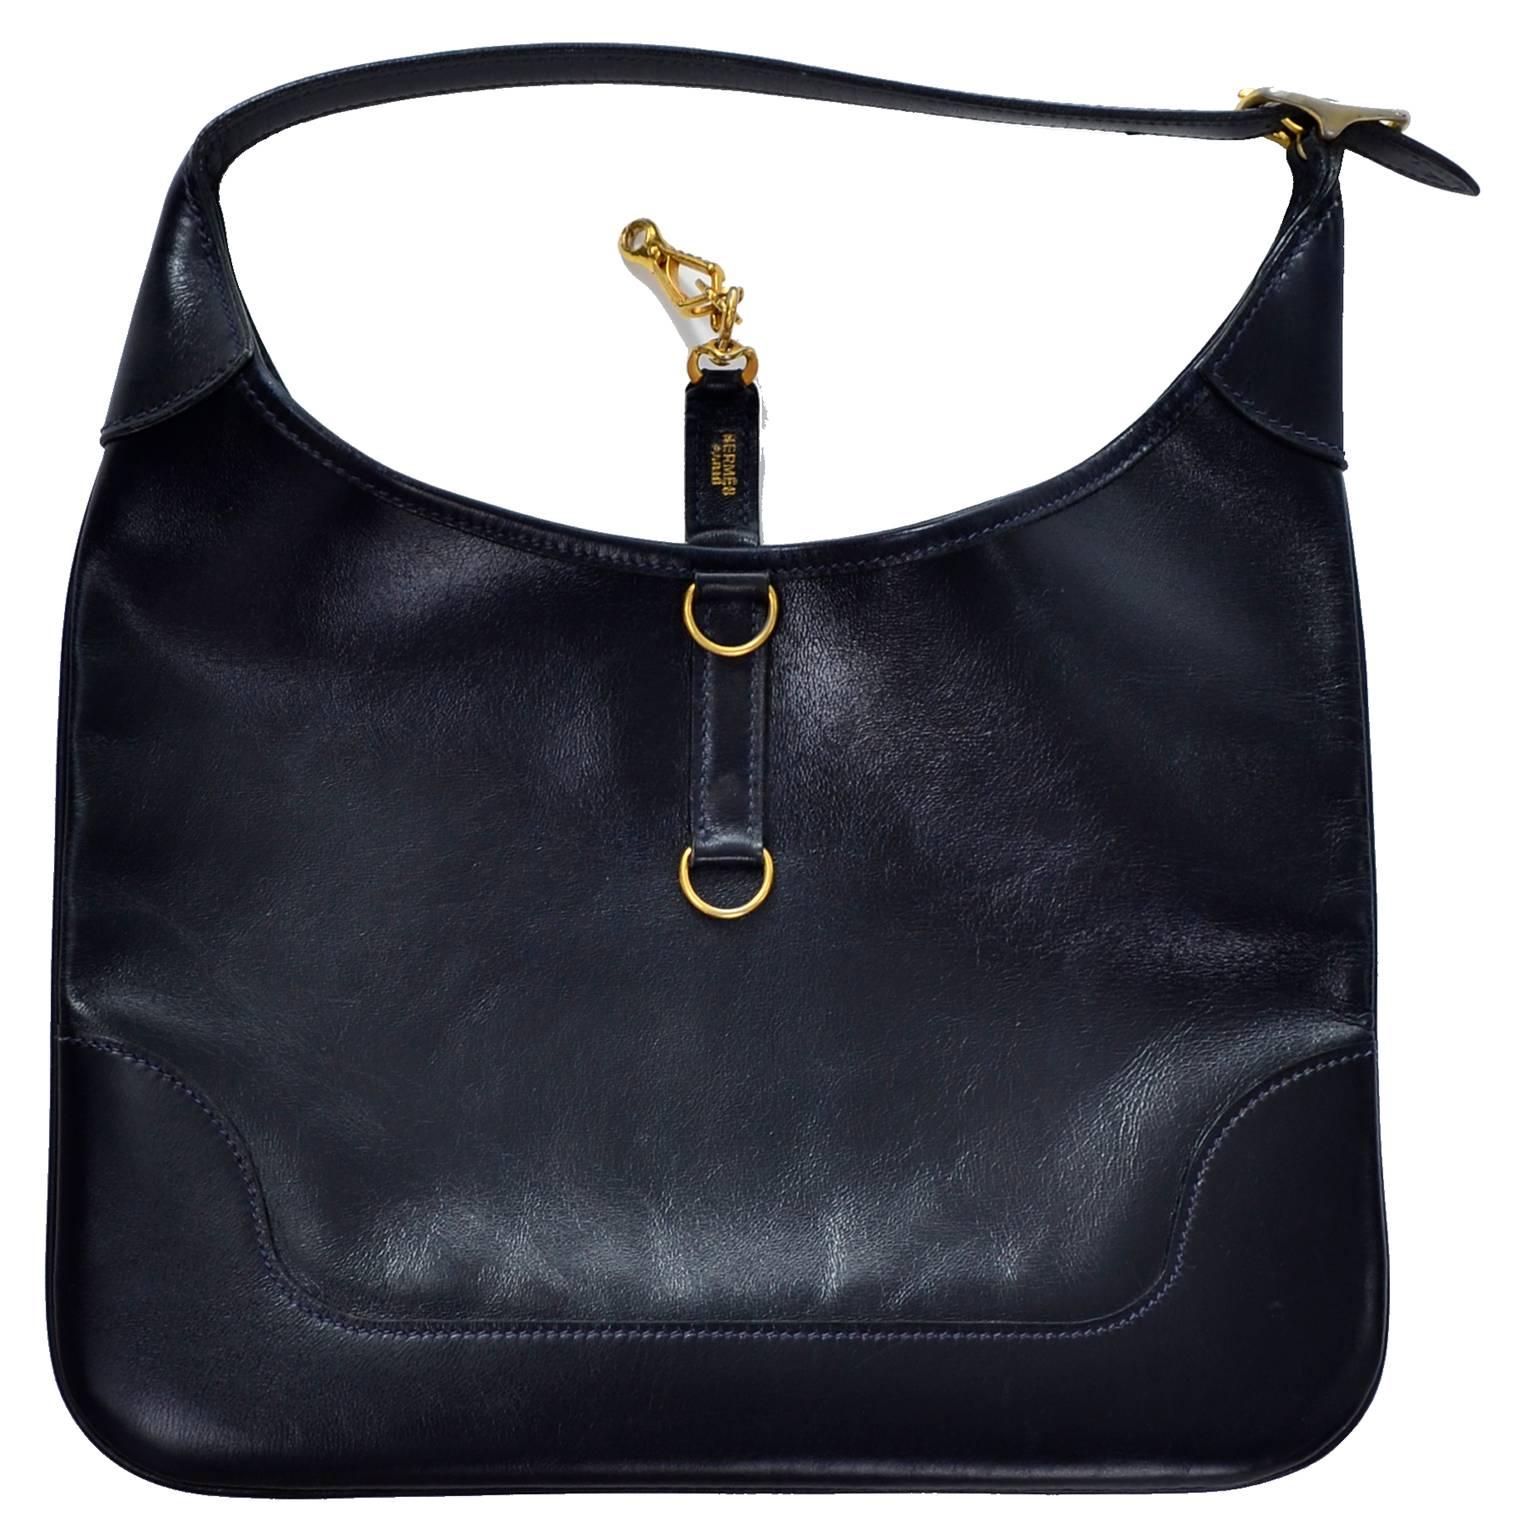 This is a beautiful 1970's vintage Hermes handbag made of a midnight blue leather with a gold tone lobster claw clasp and tonal suede interior. The leather is called box calf, named after Joseph Box, a 19th century shoemaker. 

The strap has a